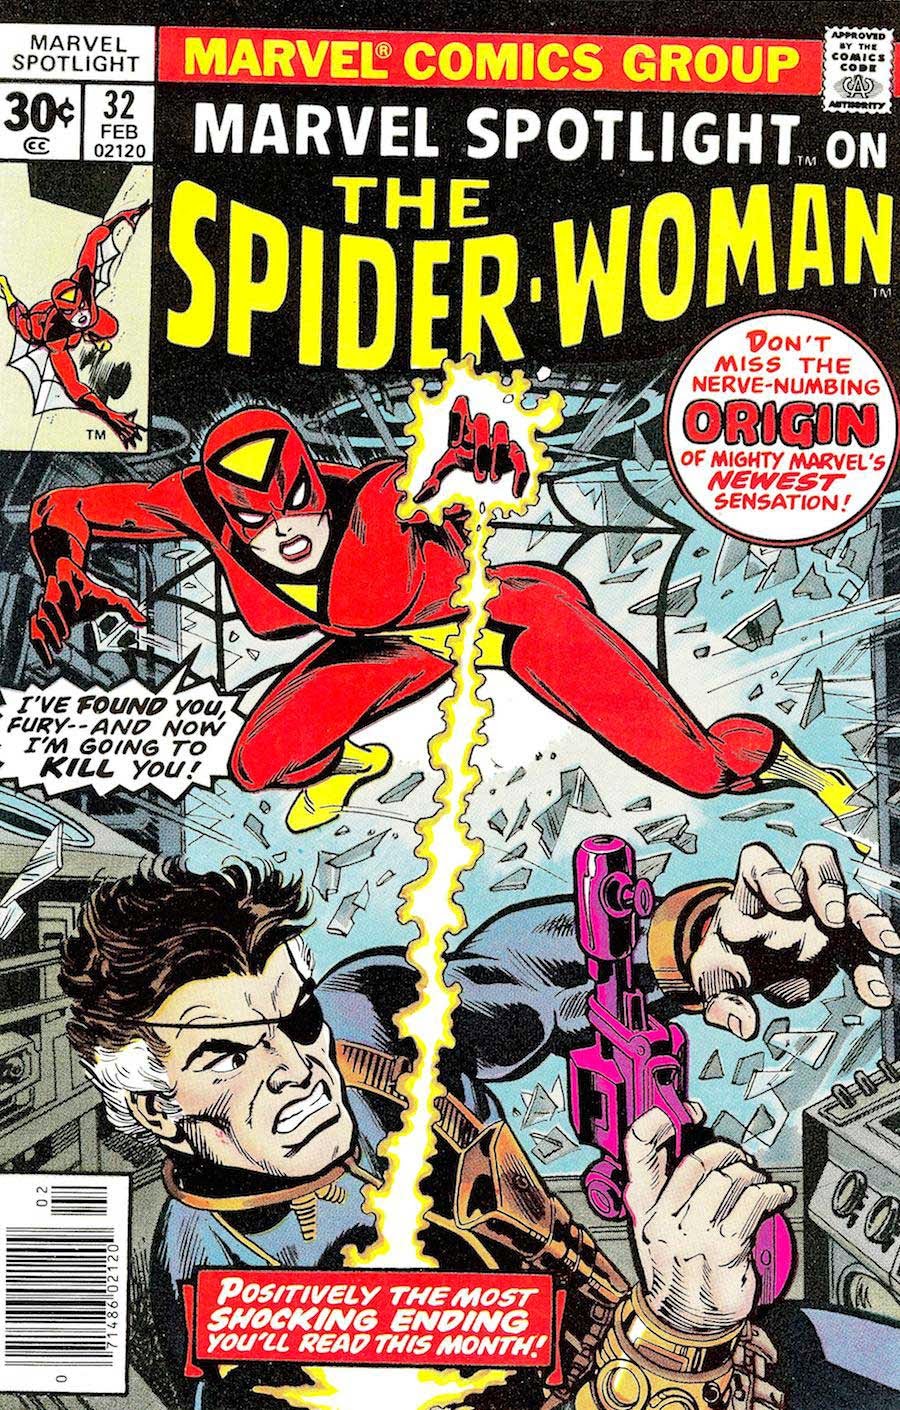 Marvel Spotlight #32 key issue 1970s bronze age comic book cover - 1st appearance Spider-woman